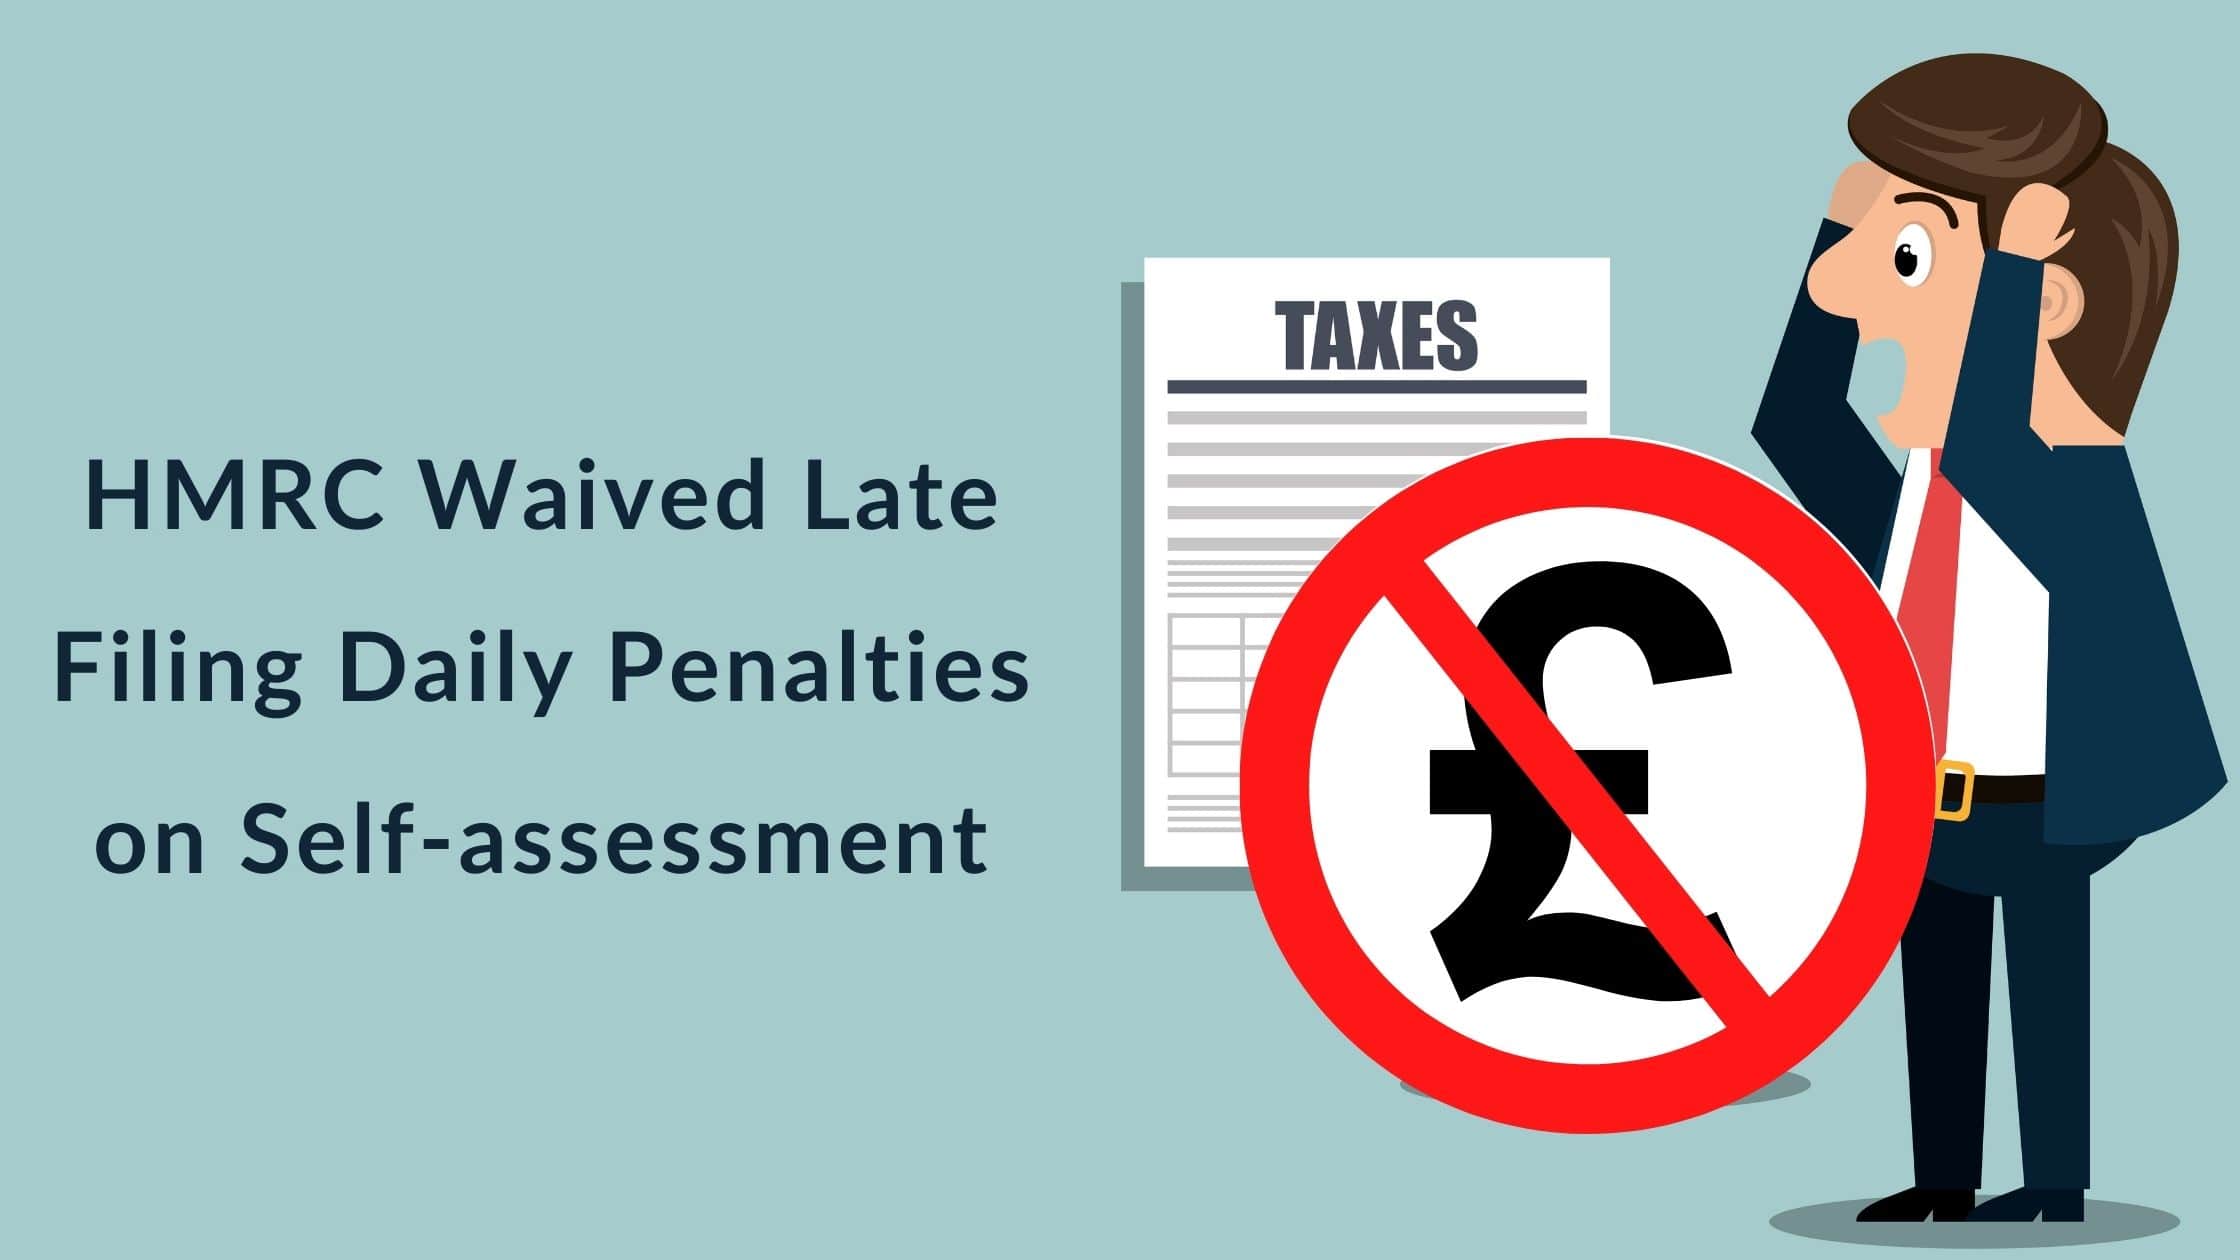 Waived Late Filing Daily Penalties On 2018 19 Self Assessment By Hmrc